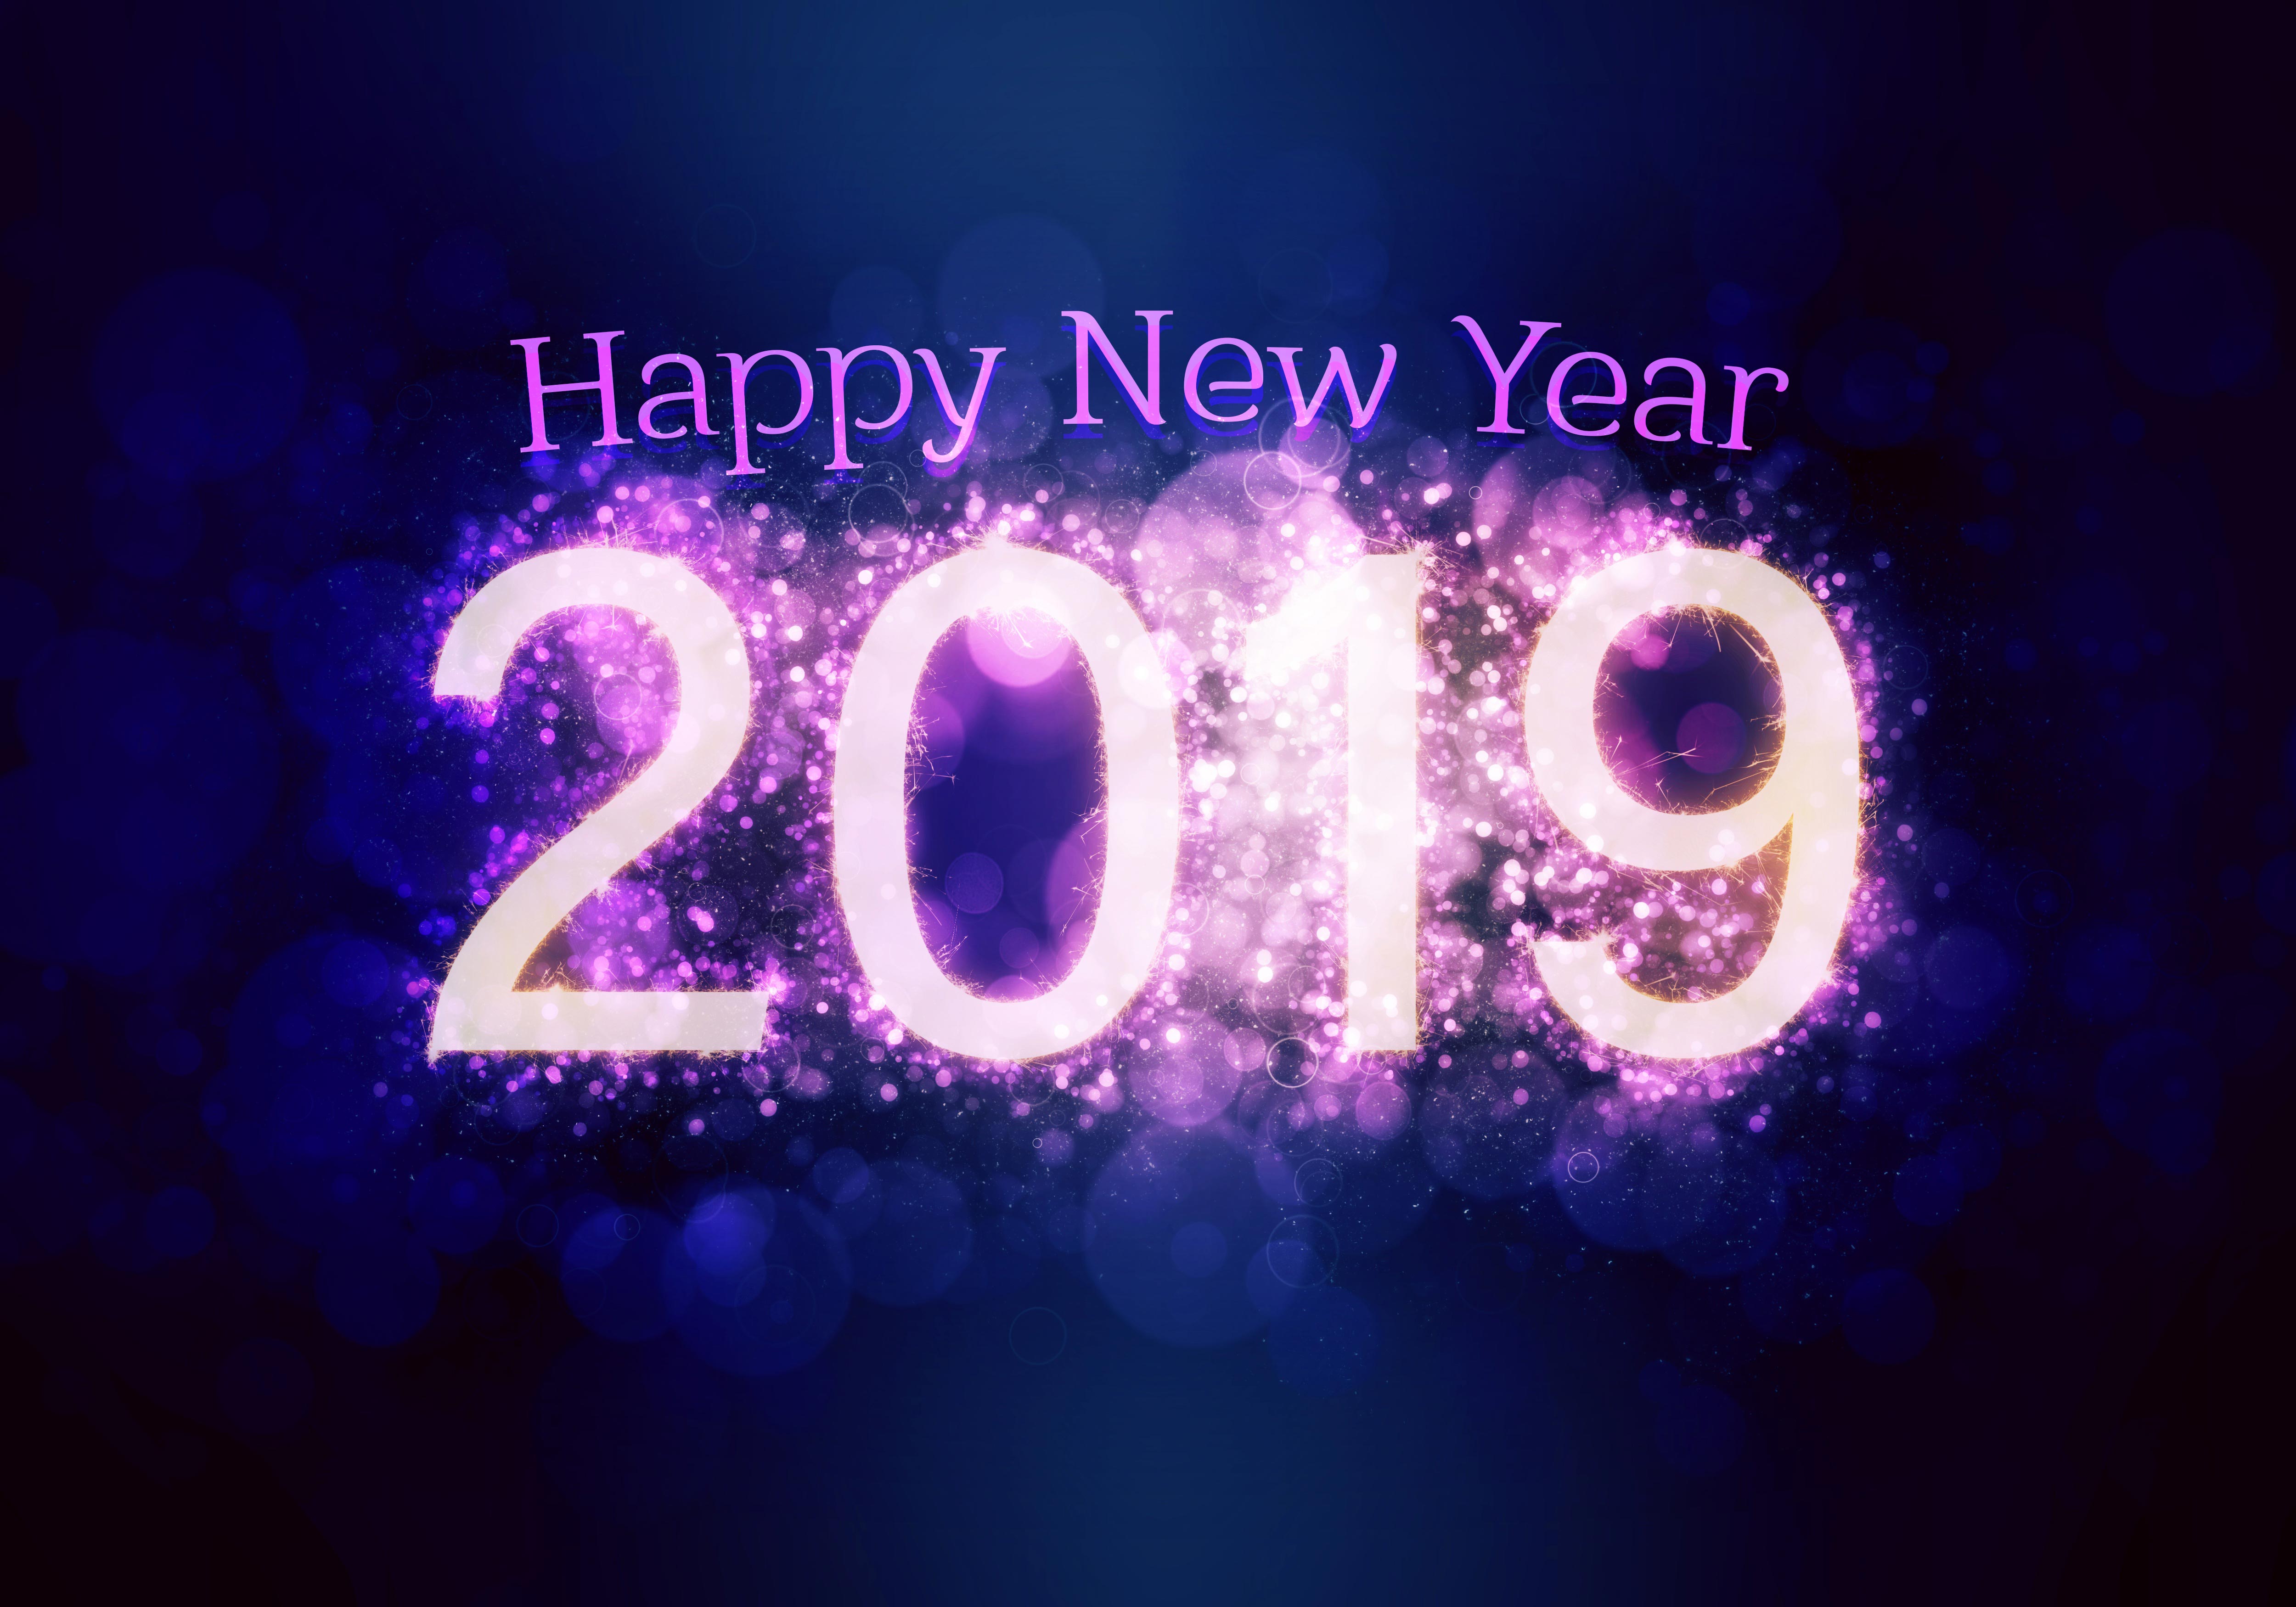 20+ Happy New Year 2019 & Fireworks Pictures & Wallpapers for Sharing